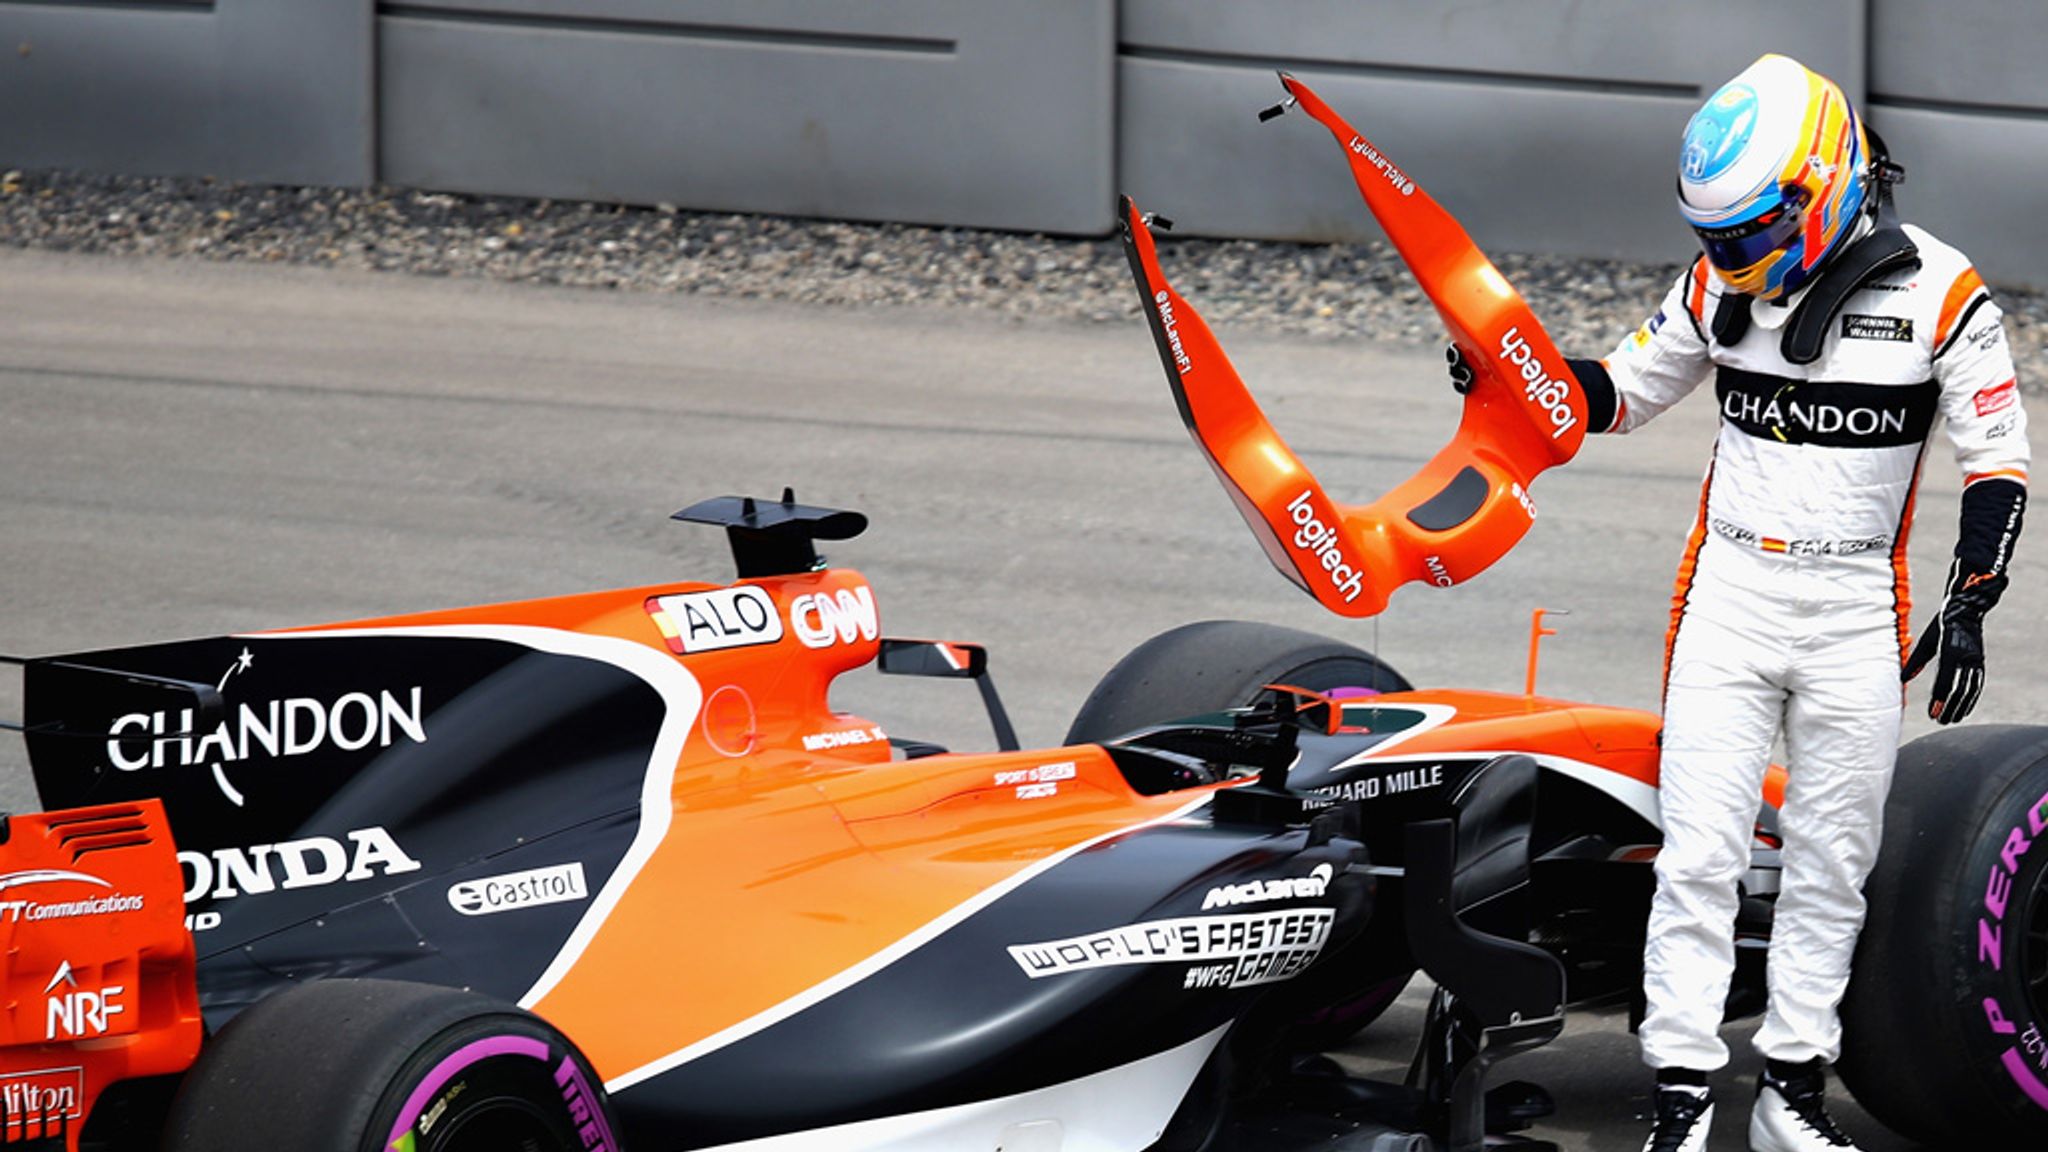 Mclaren S Changes Since Their Last F1 Race Victory At 12 Brazilian Gp F1 News